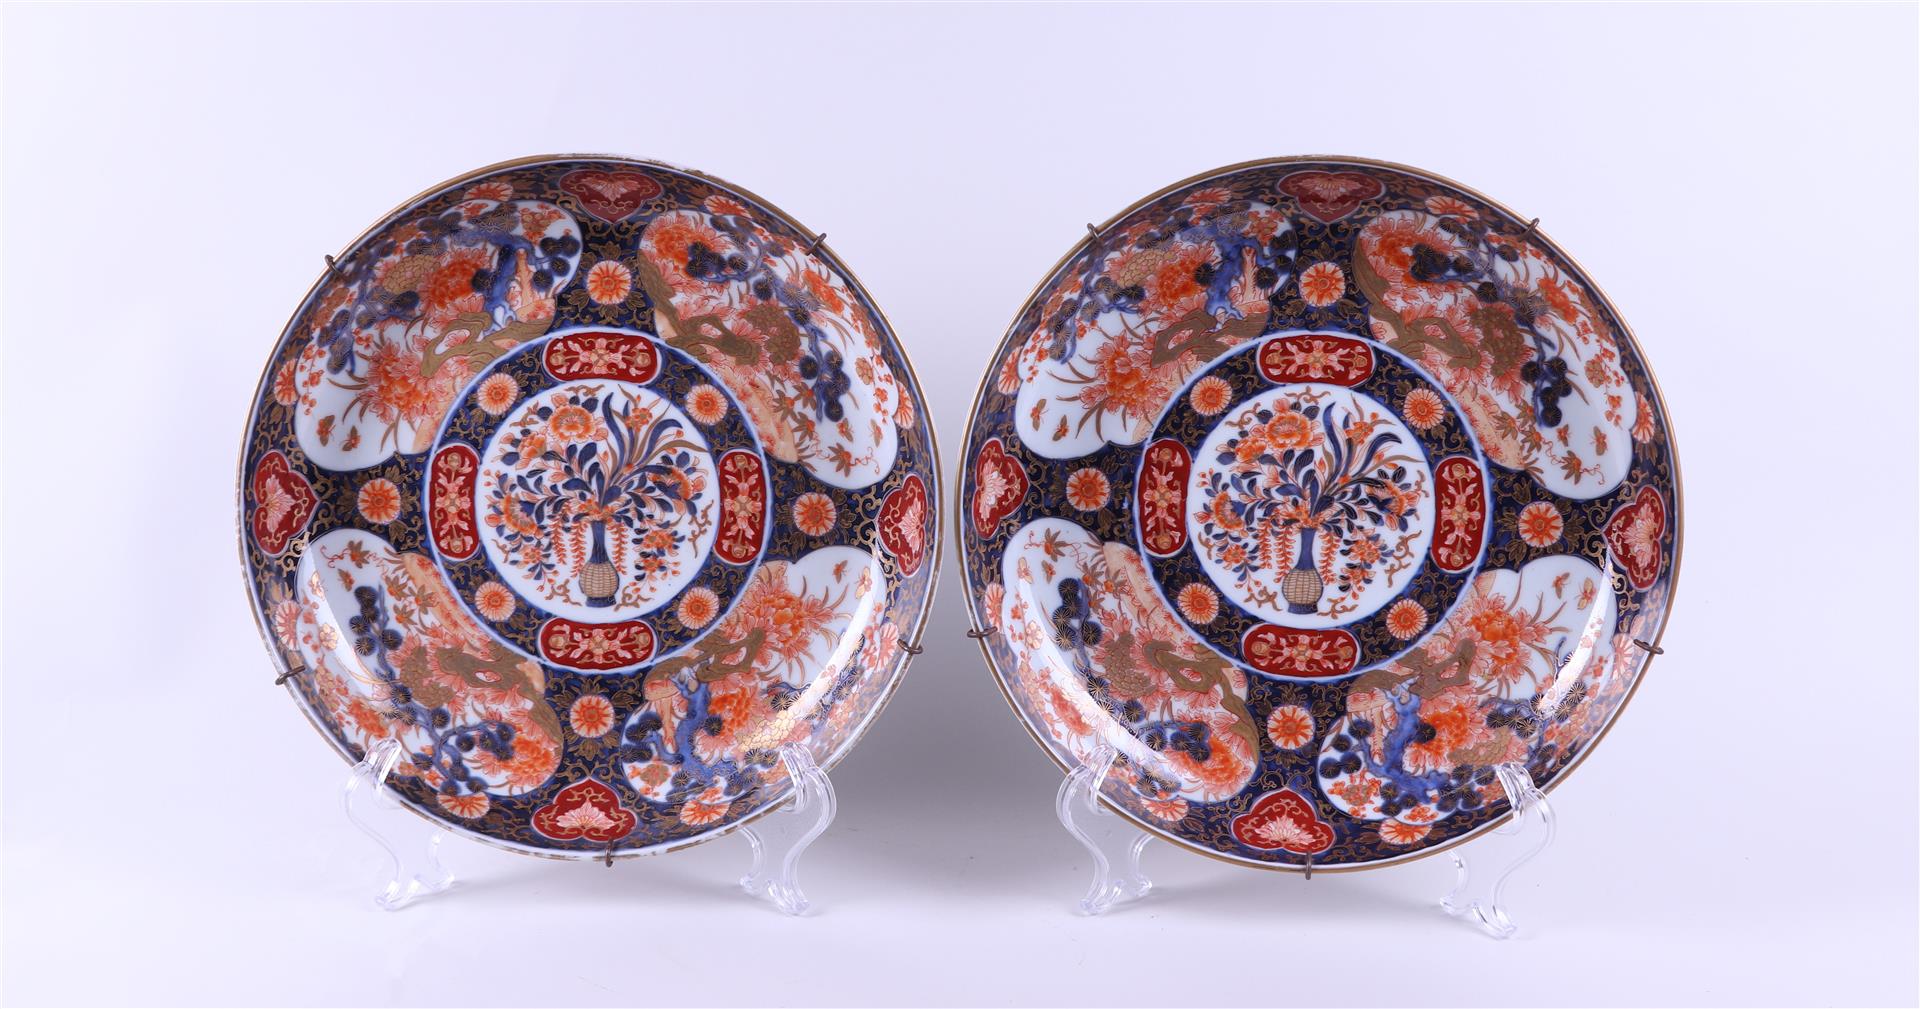 A set of richly decorated Imari wall plates. Japan, 19th century.
